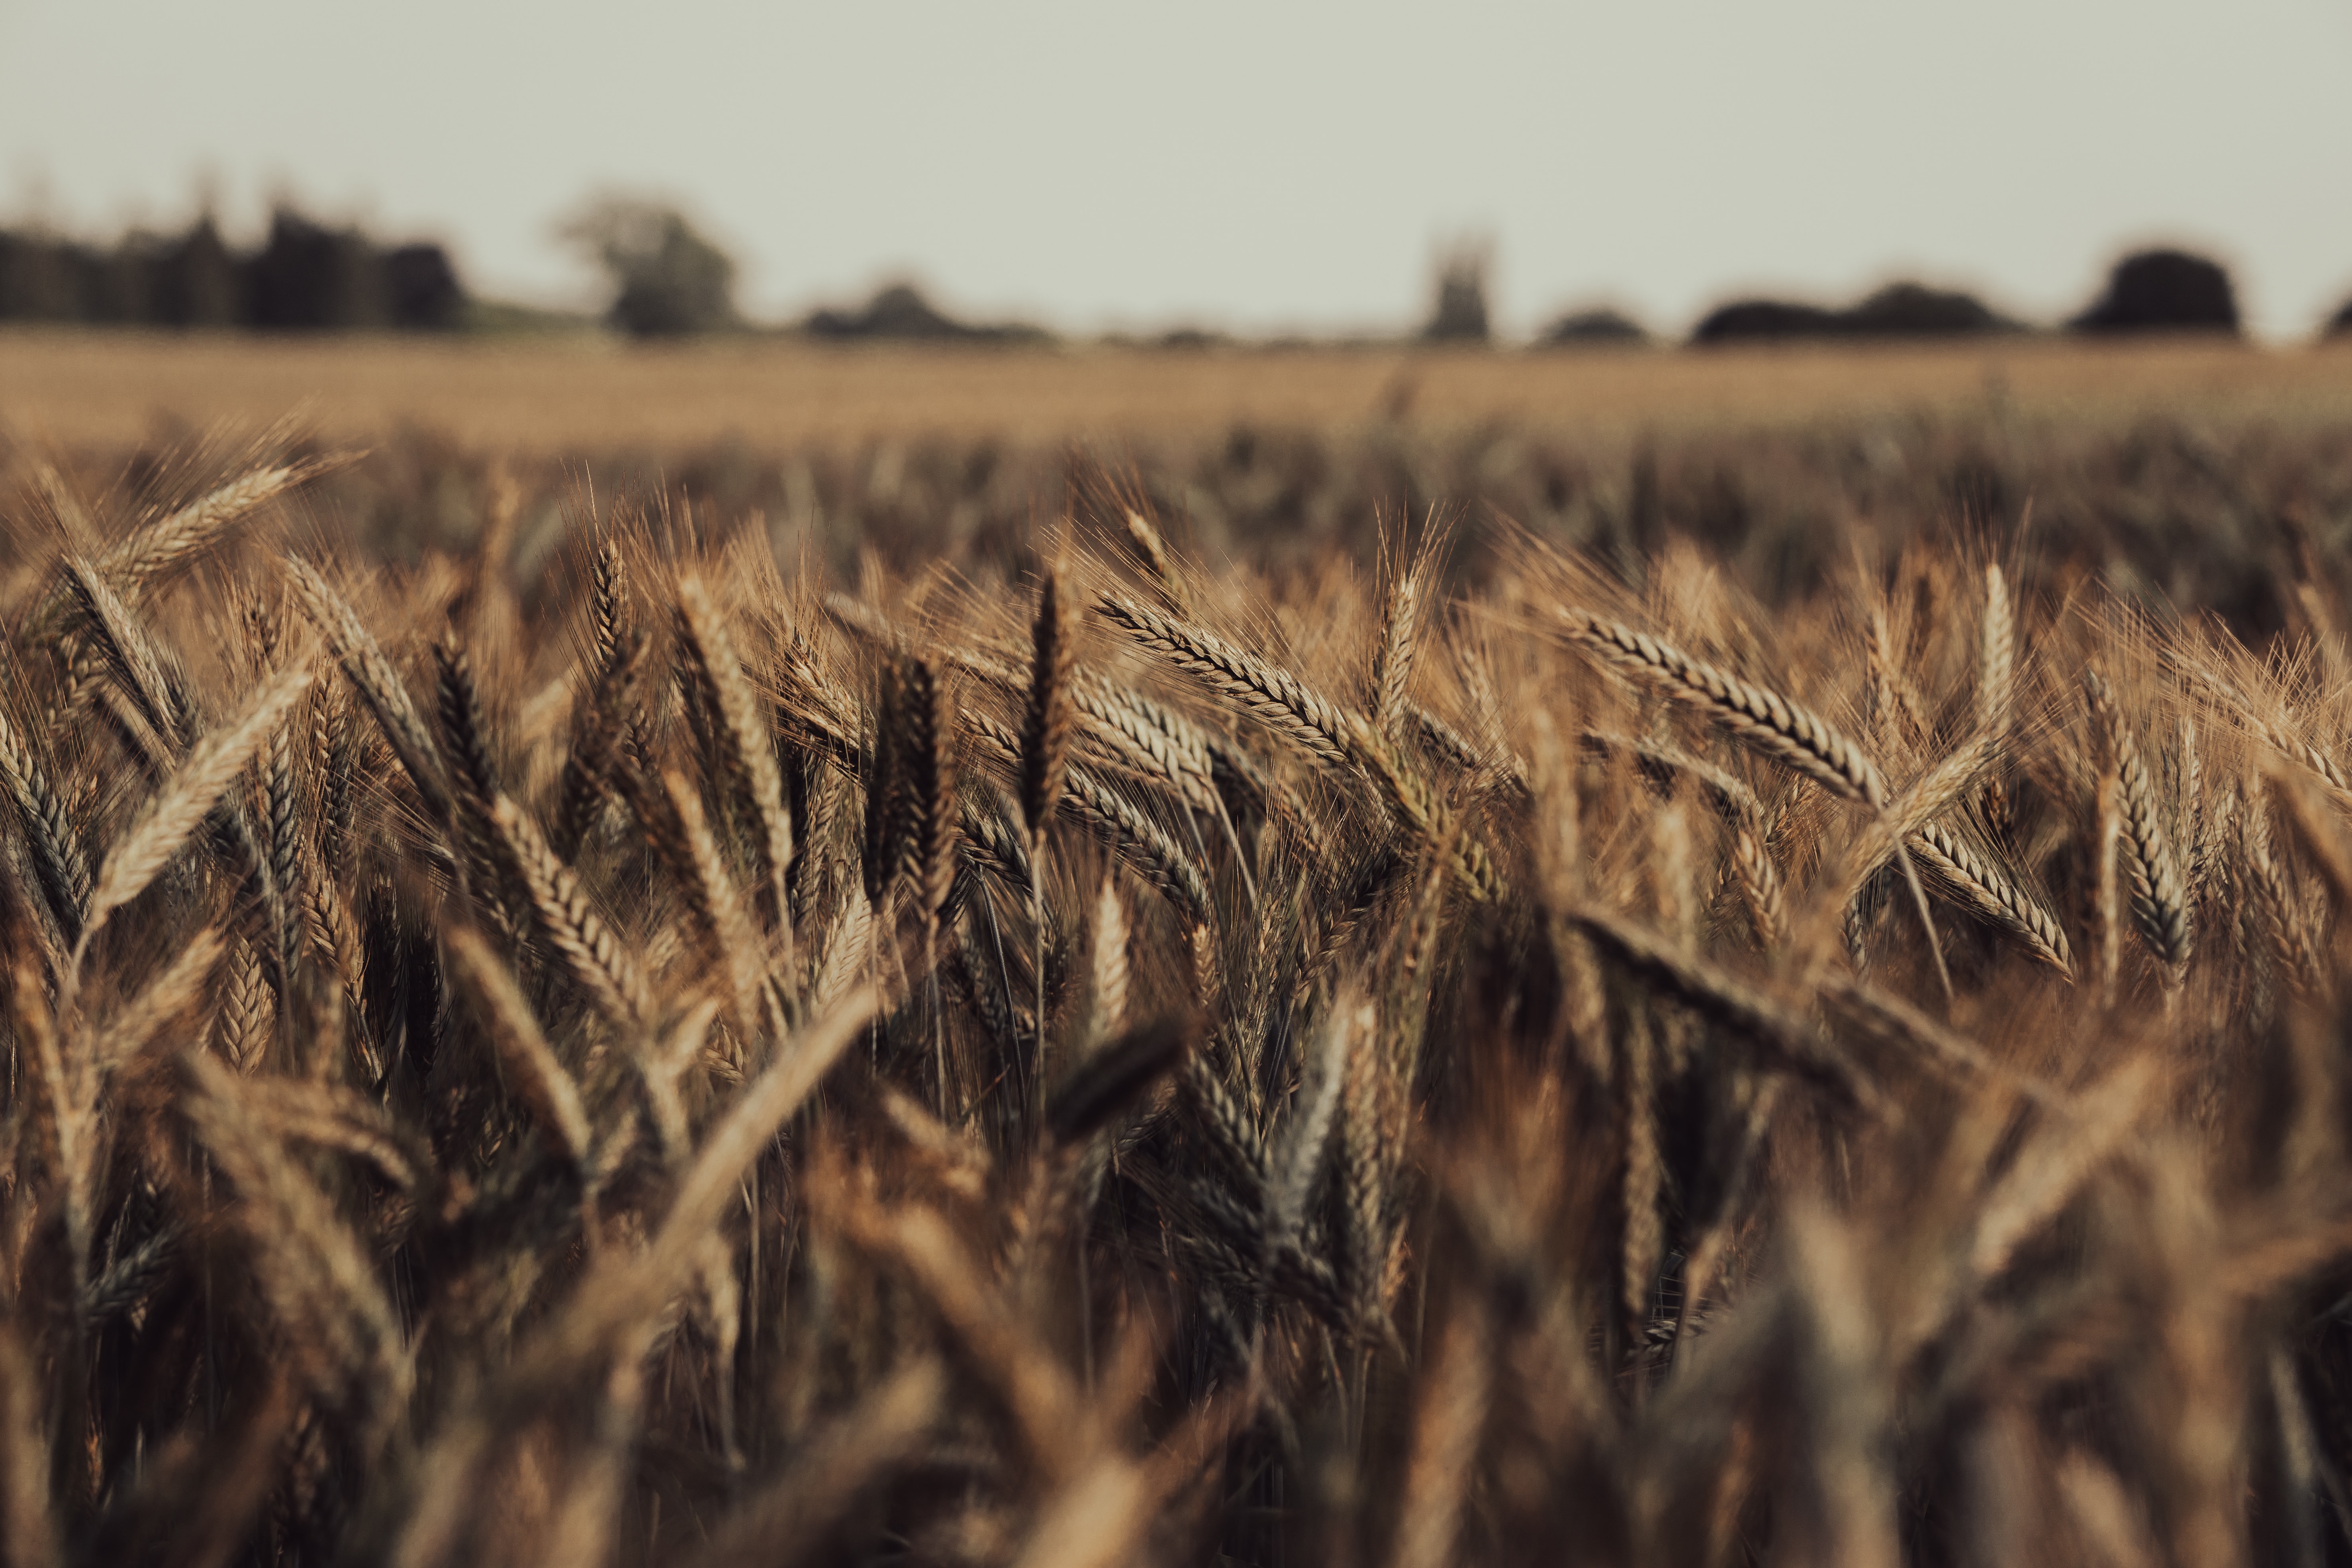 Global wheat prices preserve increases amid current geopolitical tensions, weather concerns